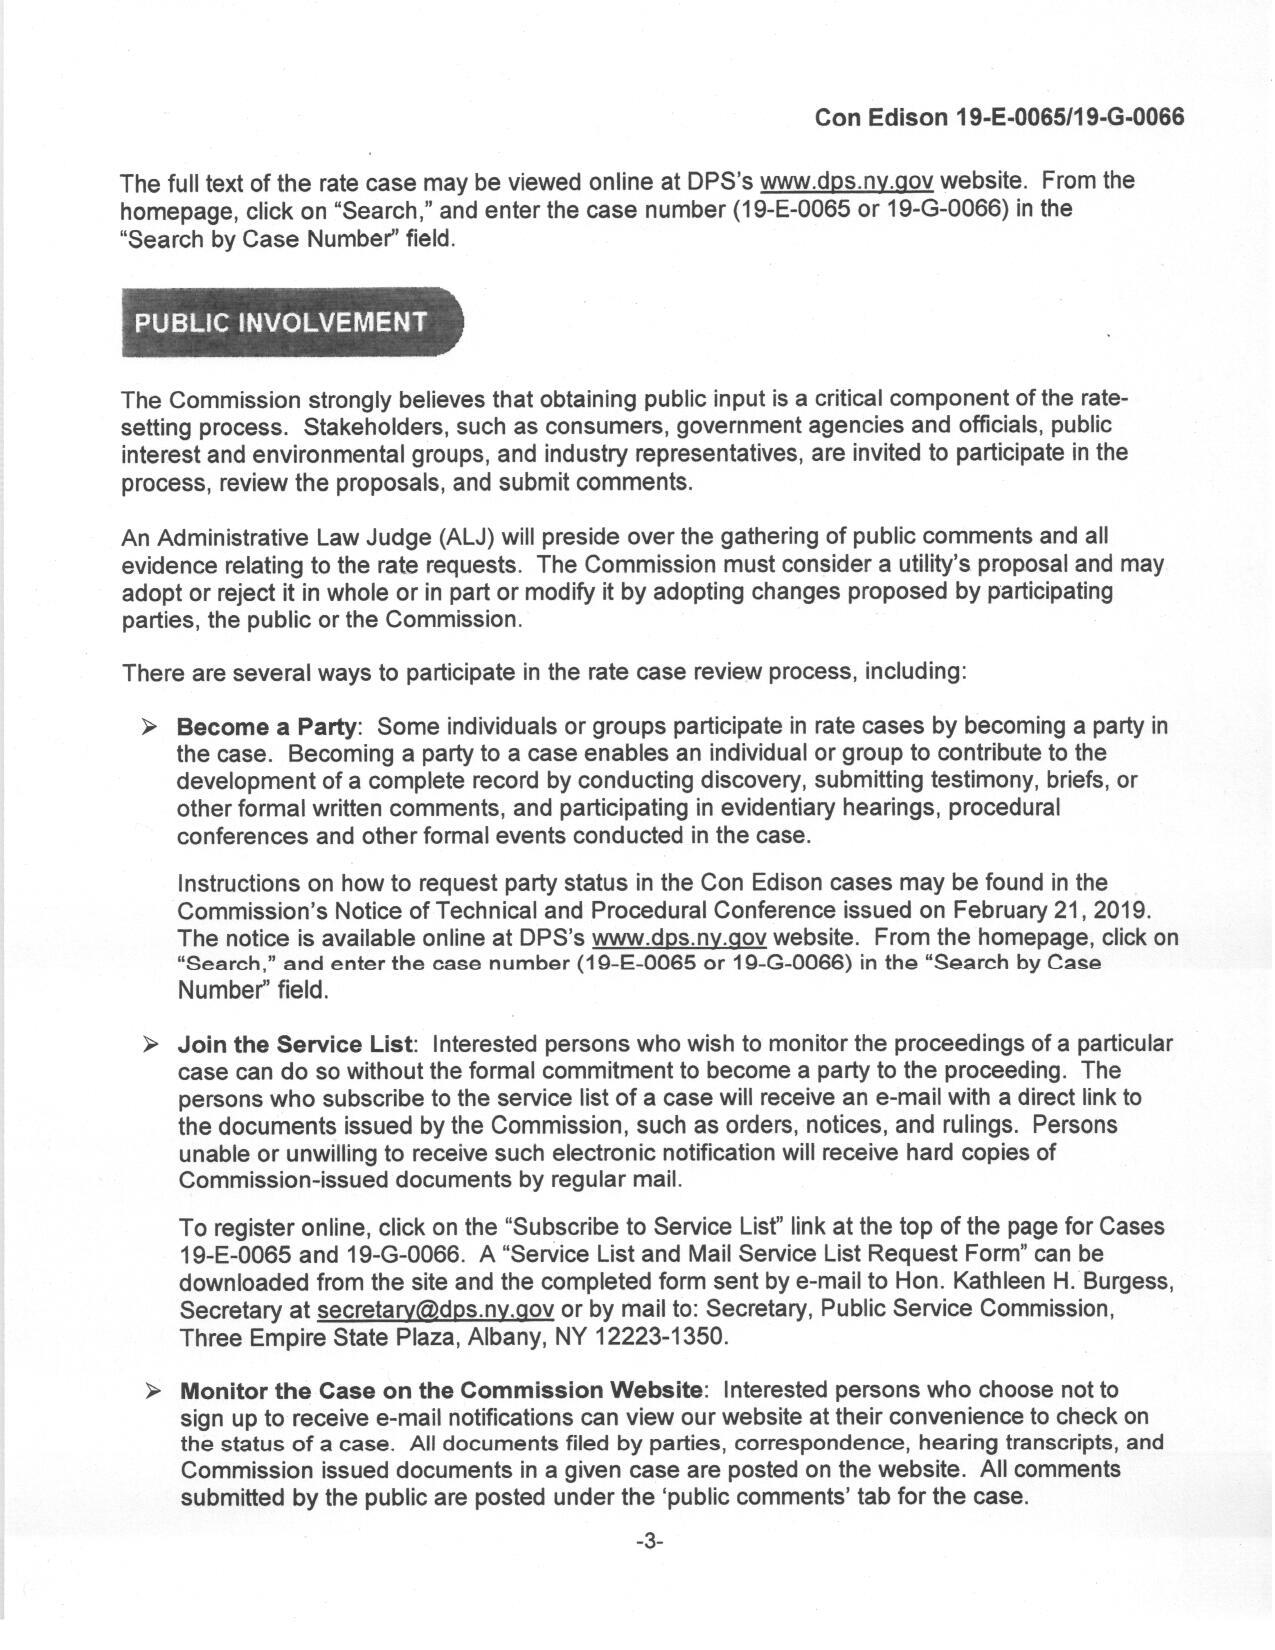 Con Ed proposed rate increase Public Hearing_Page_3